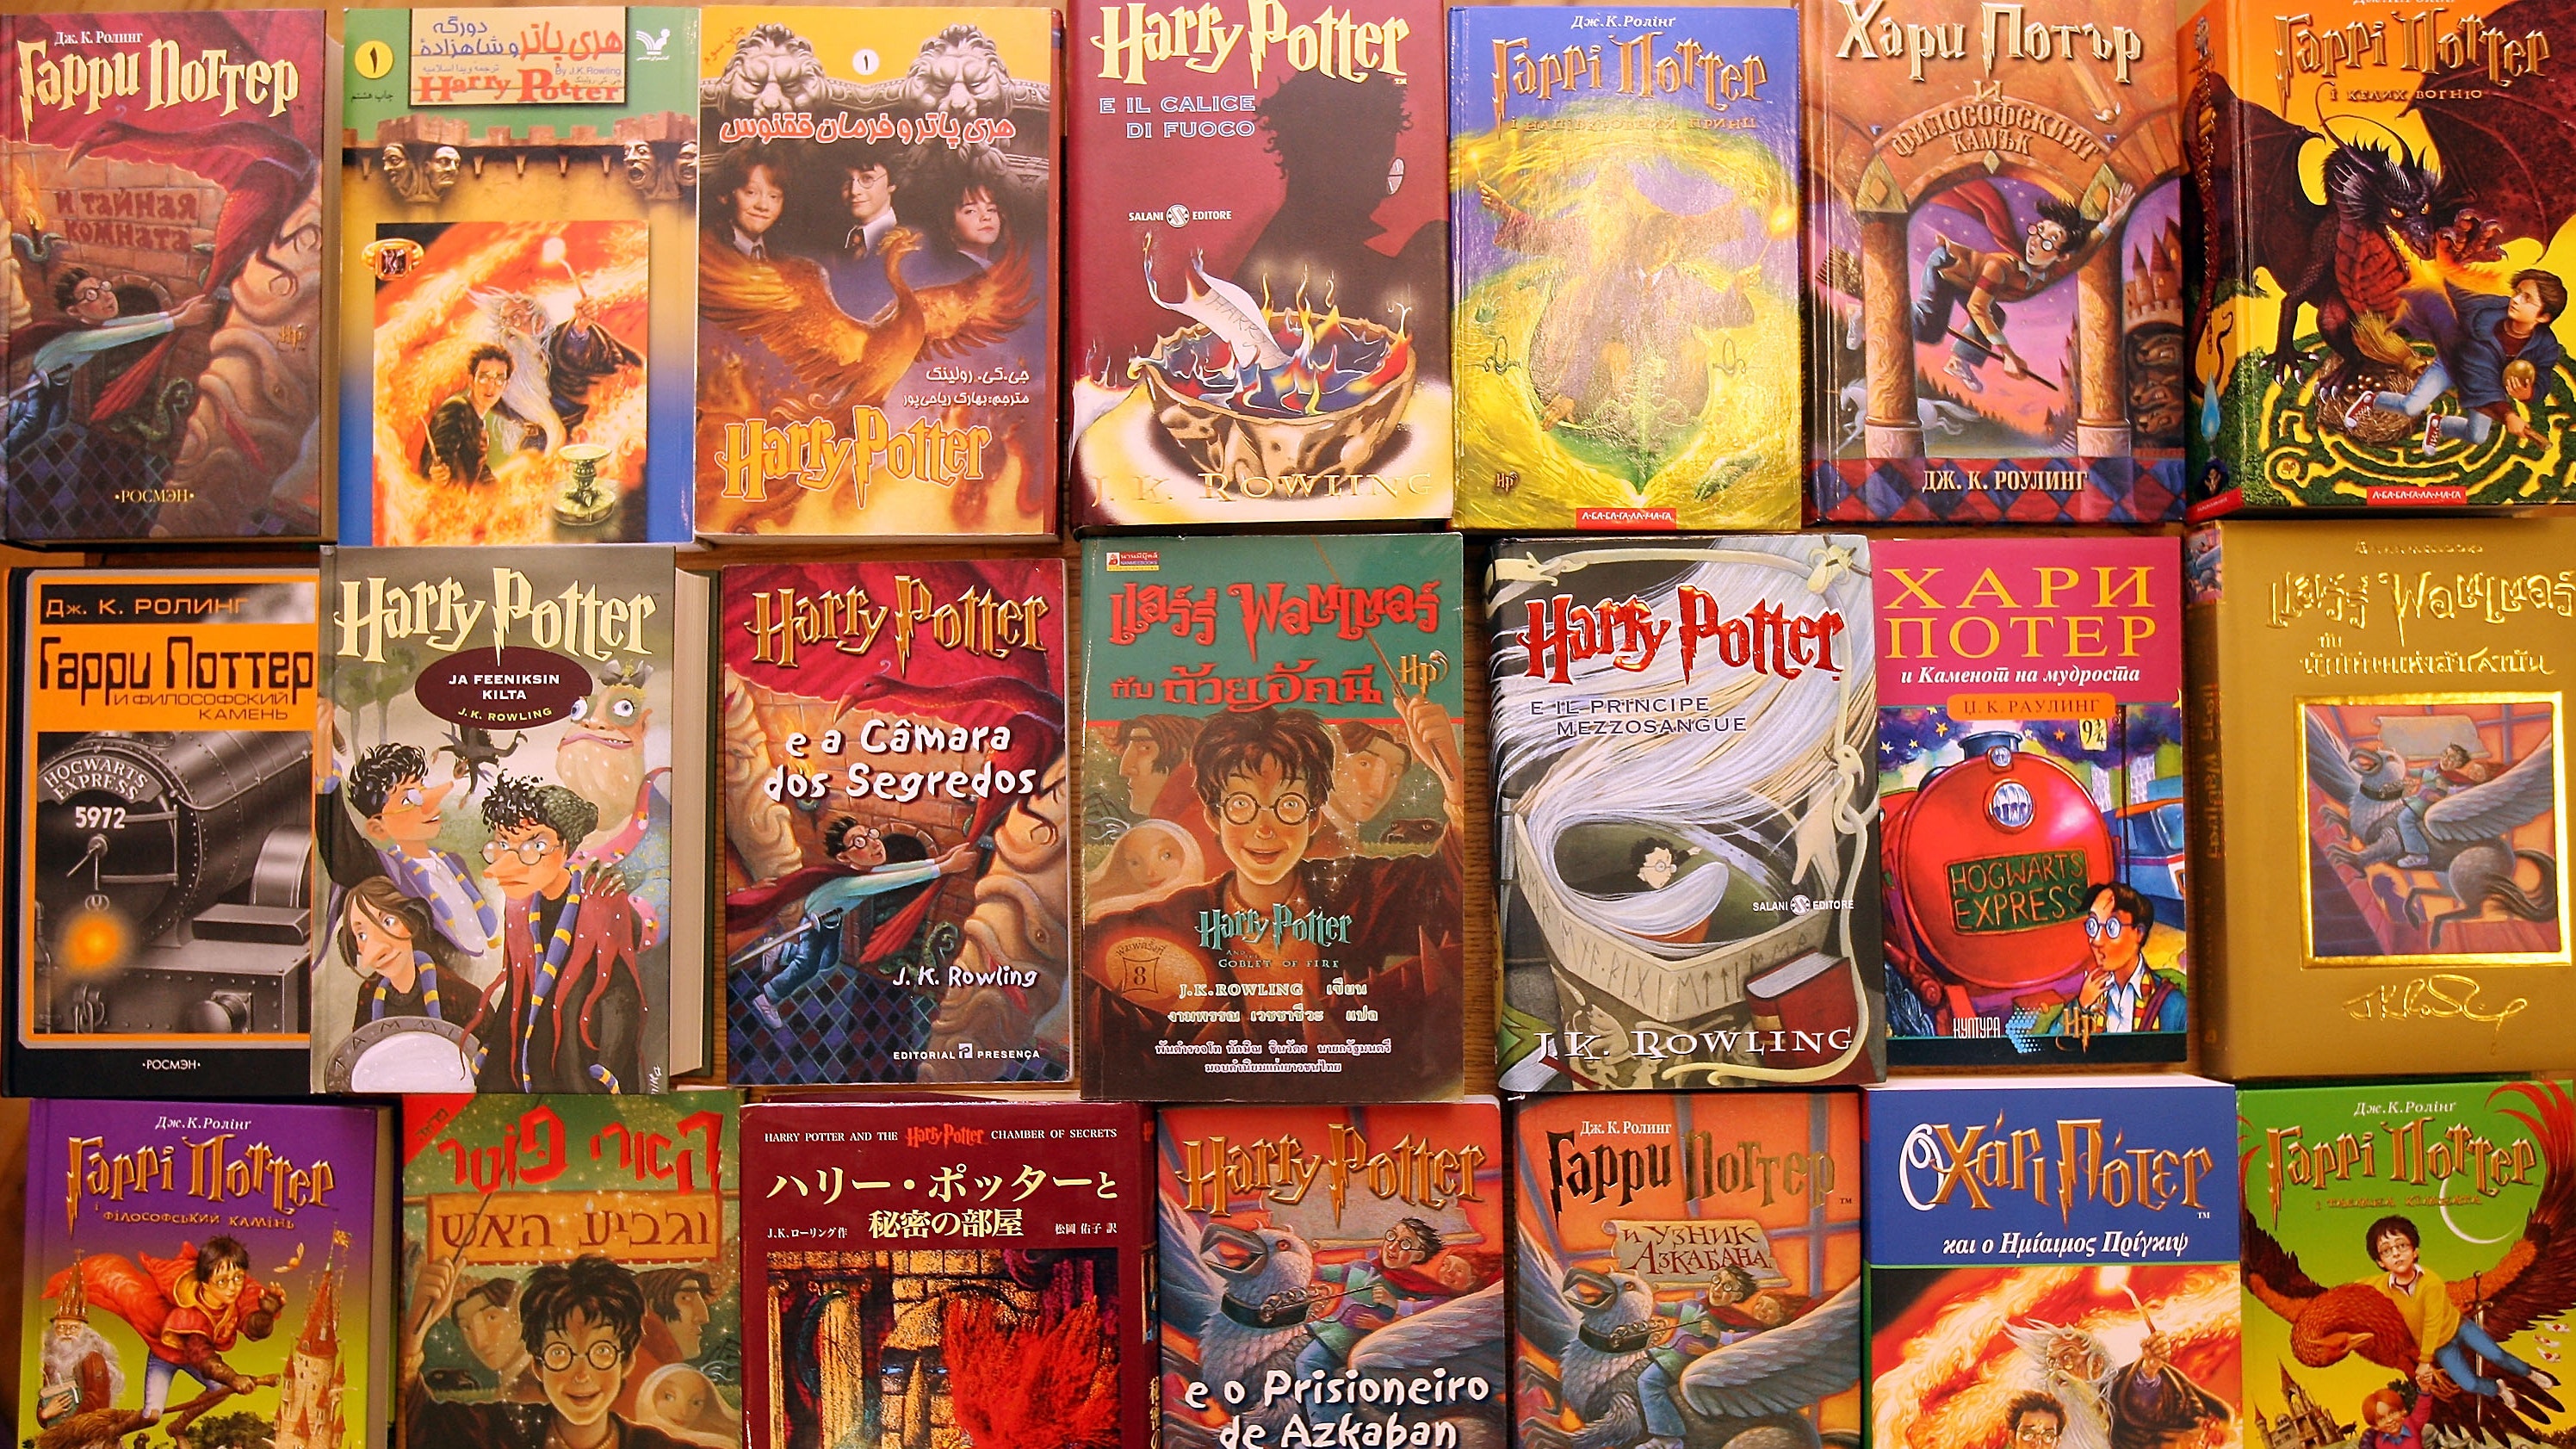 Are there any spin-off books related to Harry Potter? 2